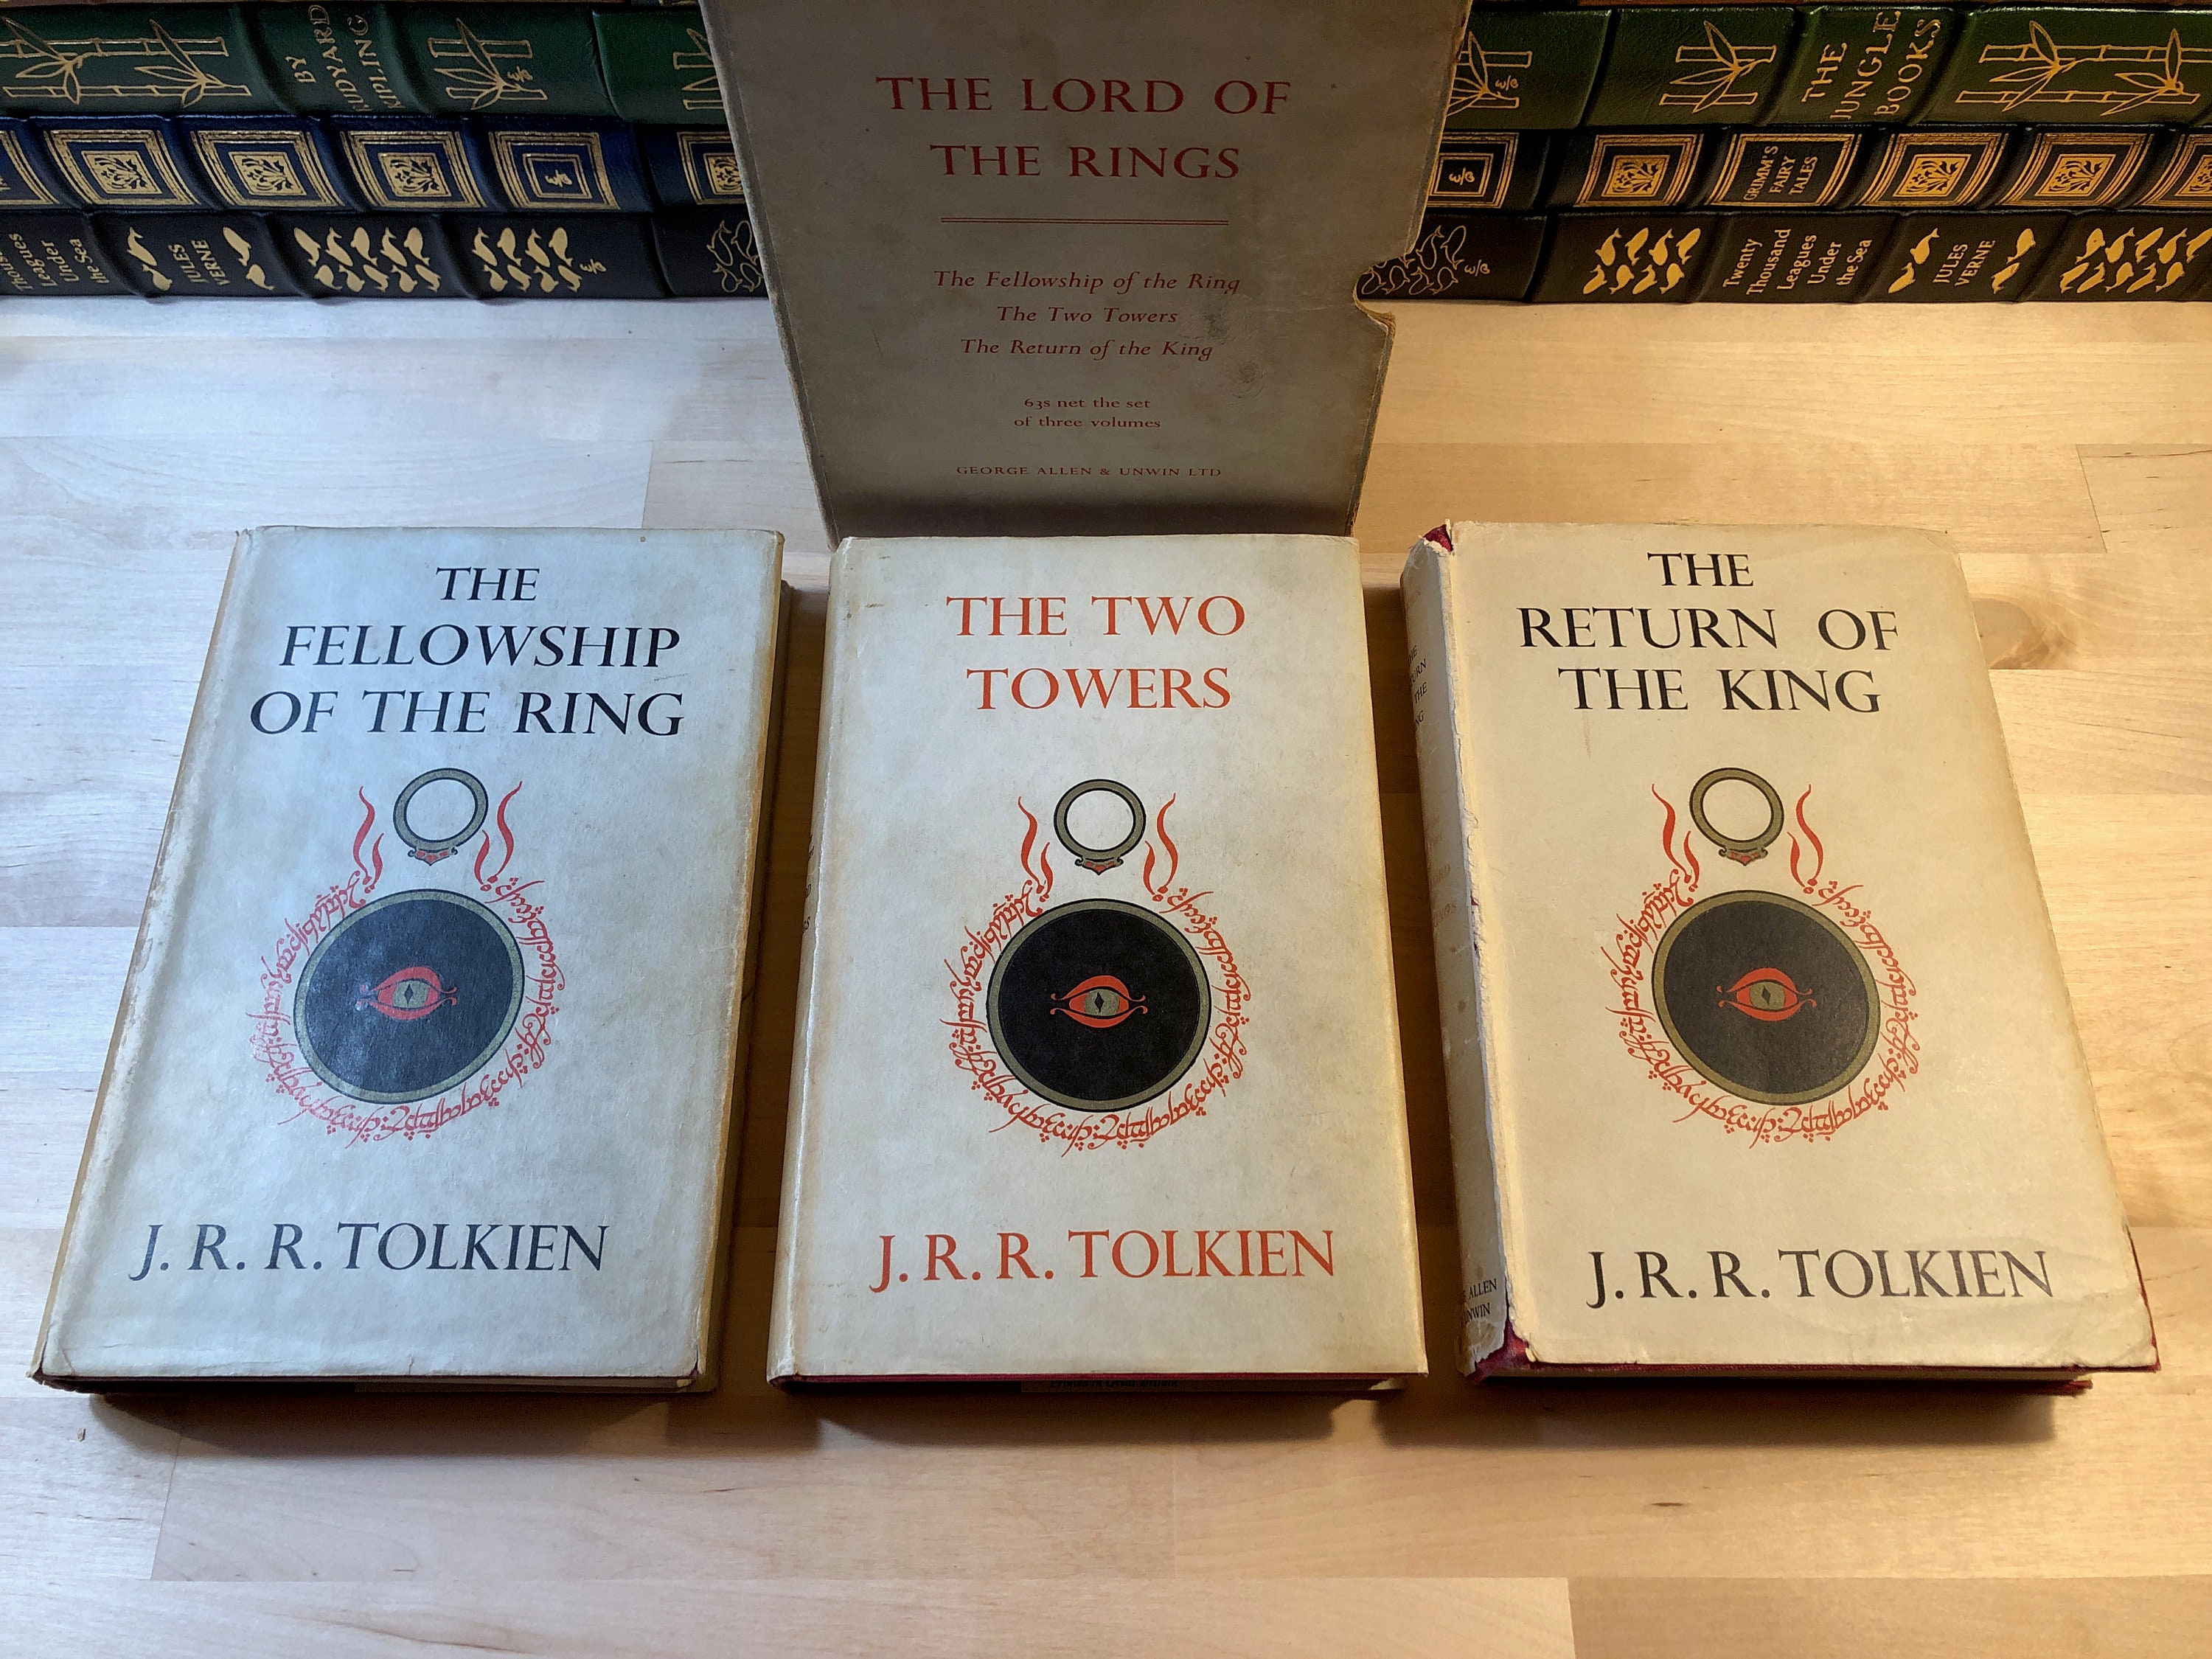 The Lord of the Rings by J.R.R. Tolkien, Exceptional Scarce and